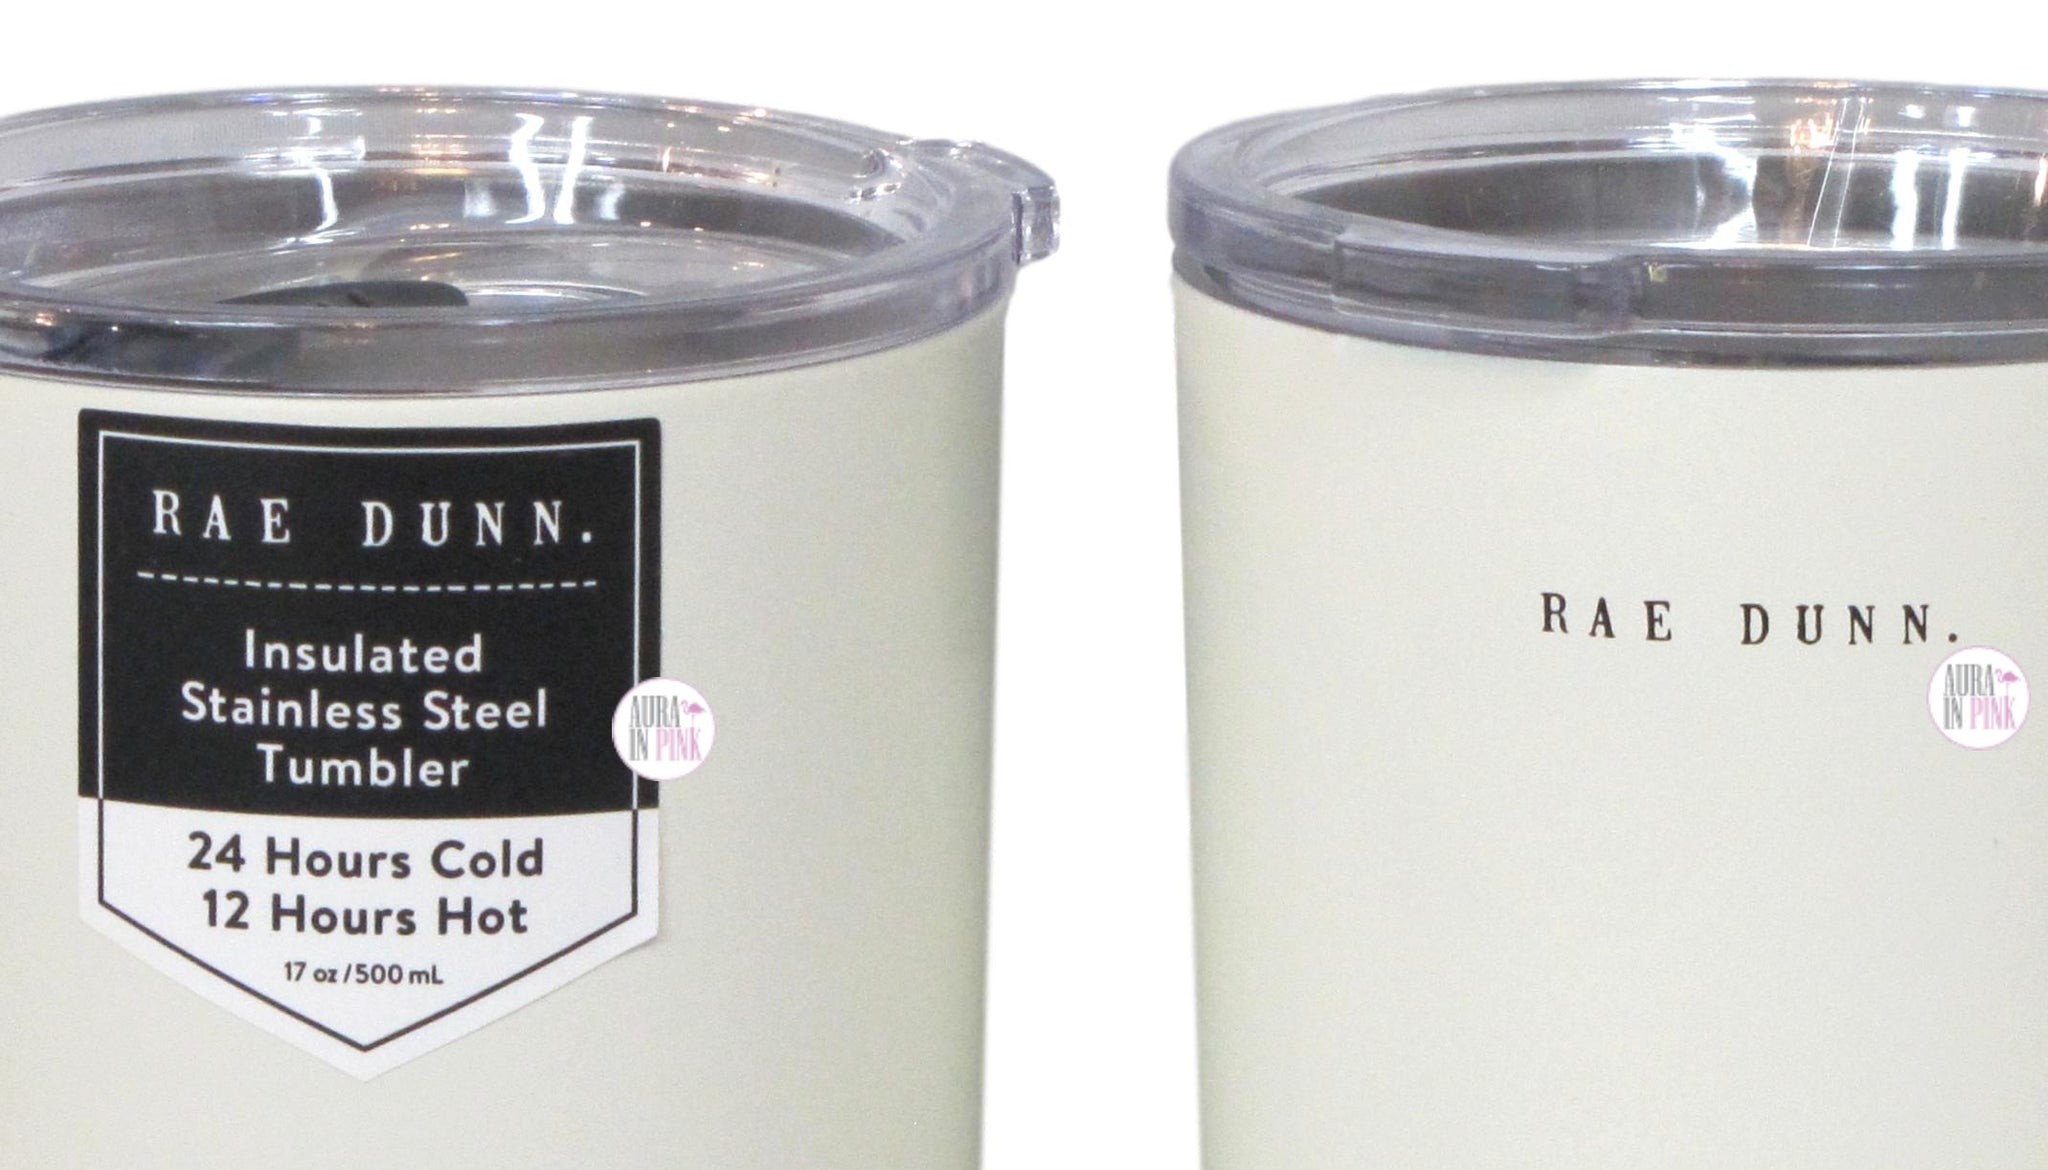 Rae Dunn Insulated Stainless Steel Tumblers w/Lids - Hot Mess, But